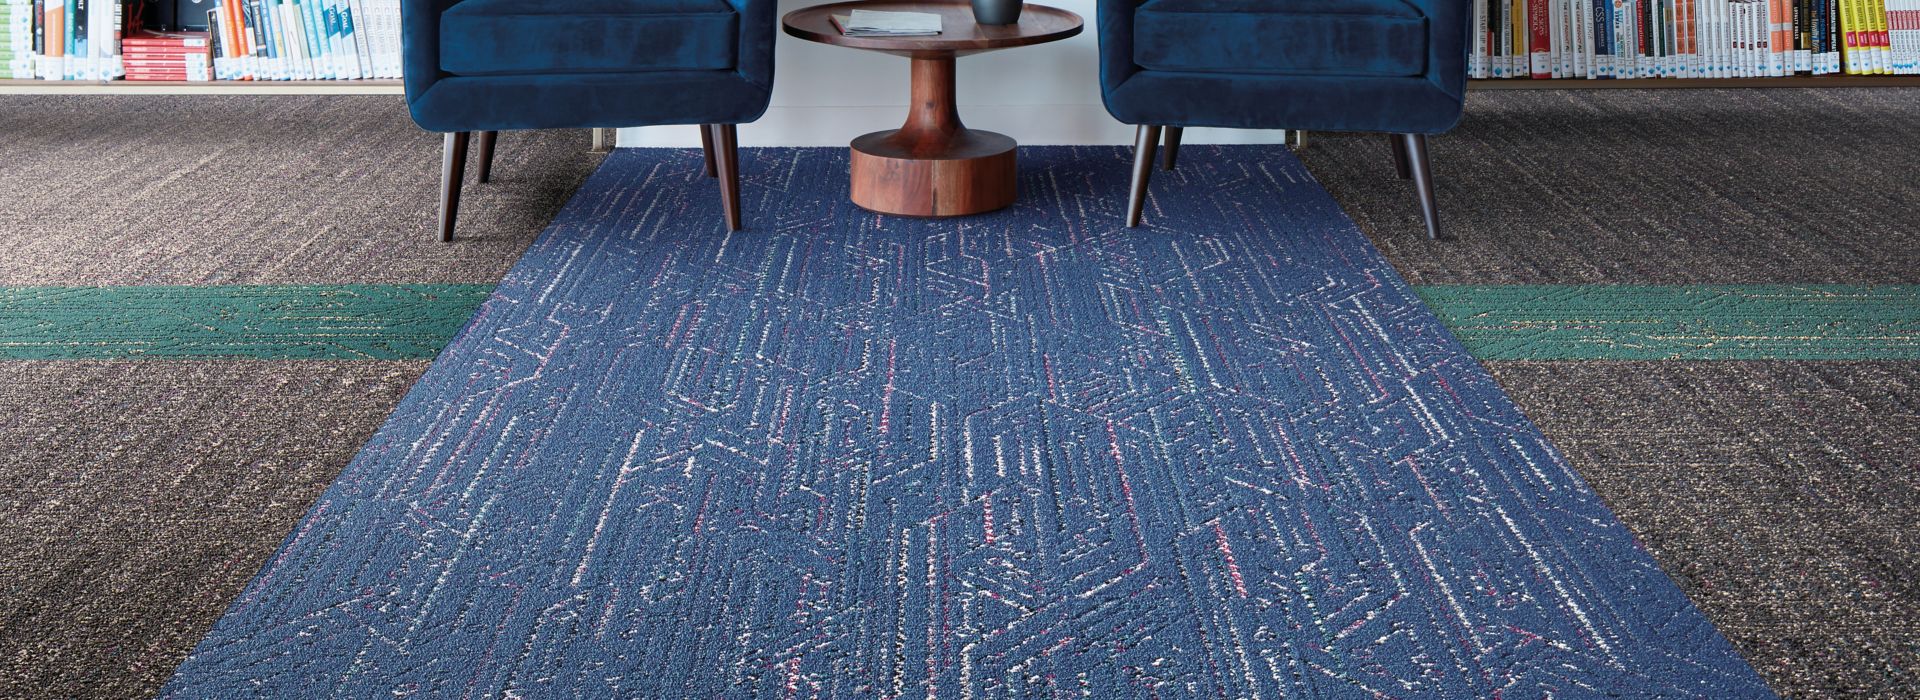 Interface Circuit Board and Static Lines plank carpet tile in design library with two chairs image number 1